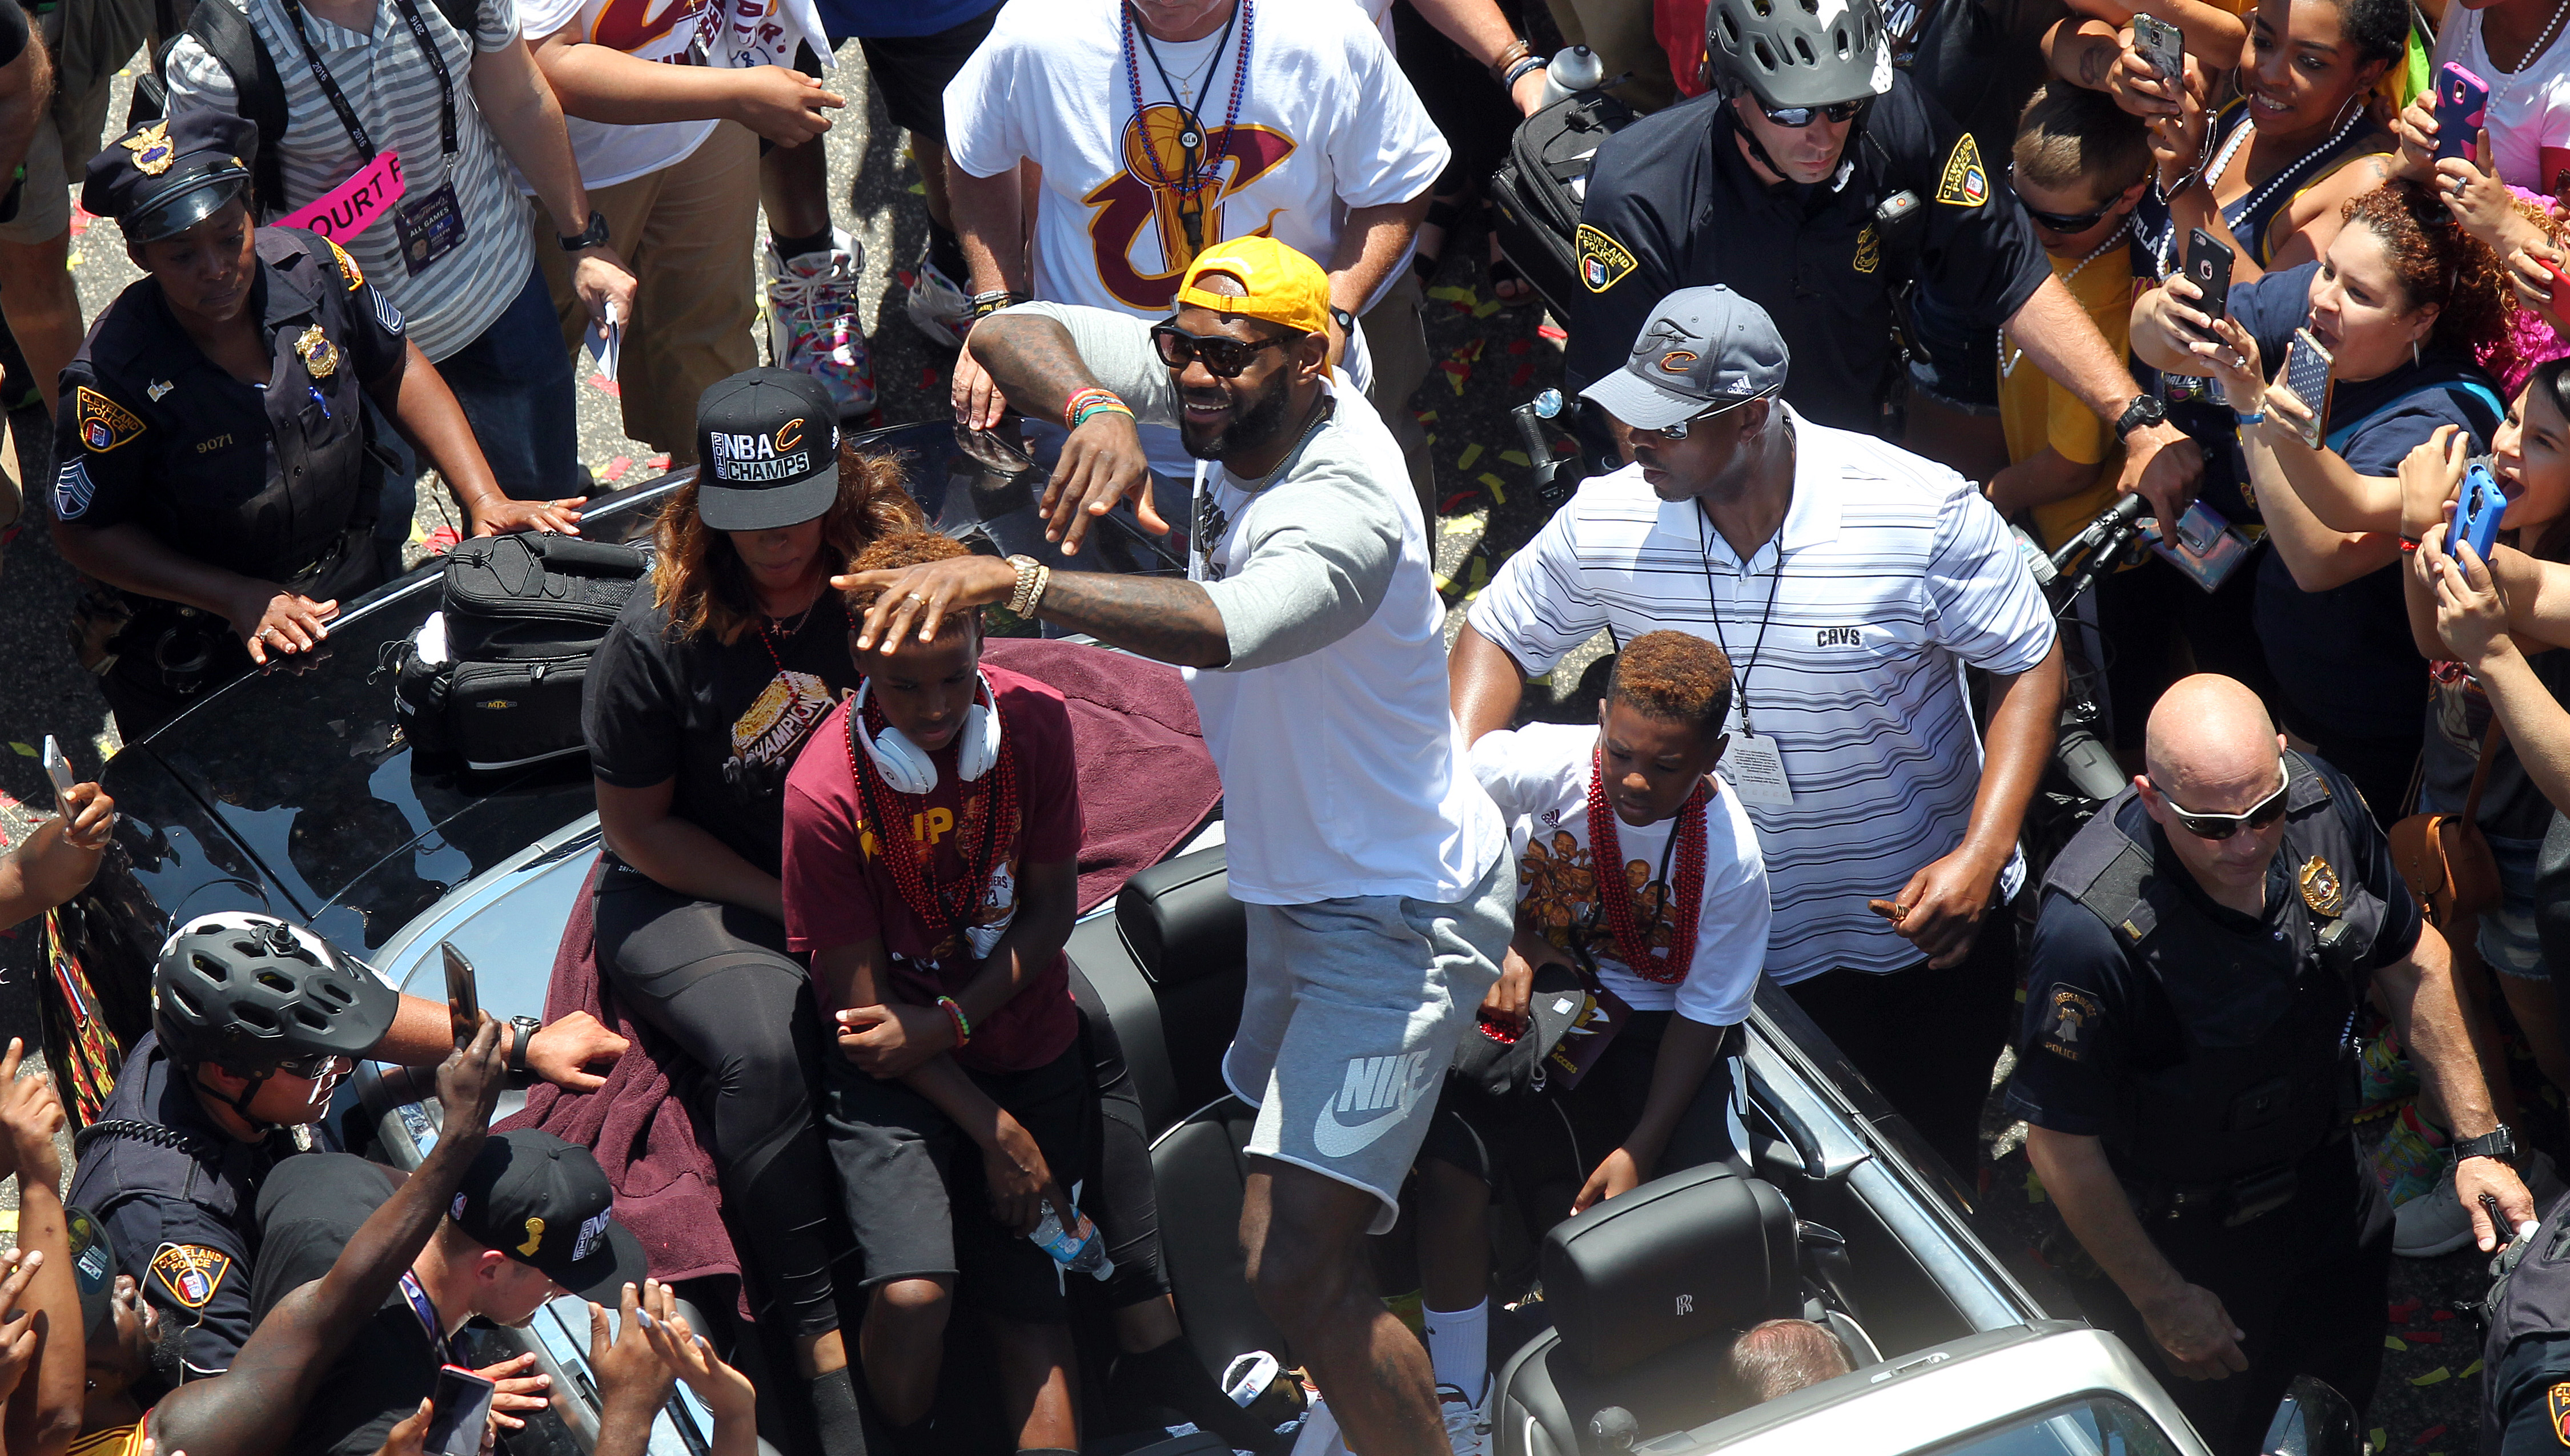 Cleveland Cavaliers forward LeBron James points to the fans during a parade in downtown Cleveland to celebrate and honor the 2016 NBA Champion Cleveland Cavaliers.    Joshua Gunter, cleveland.com June 22, 2016. Cleveland. 